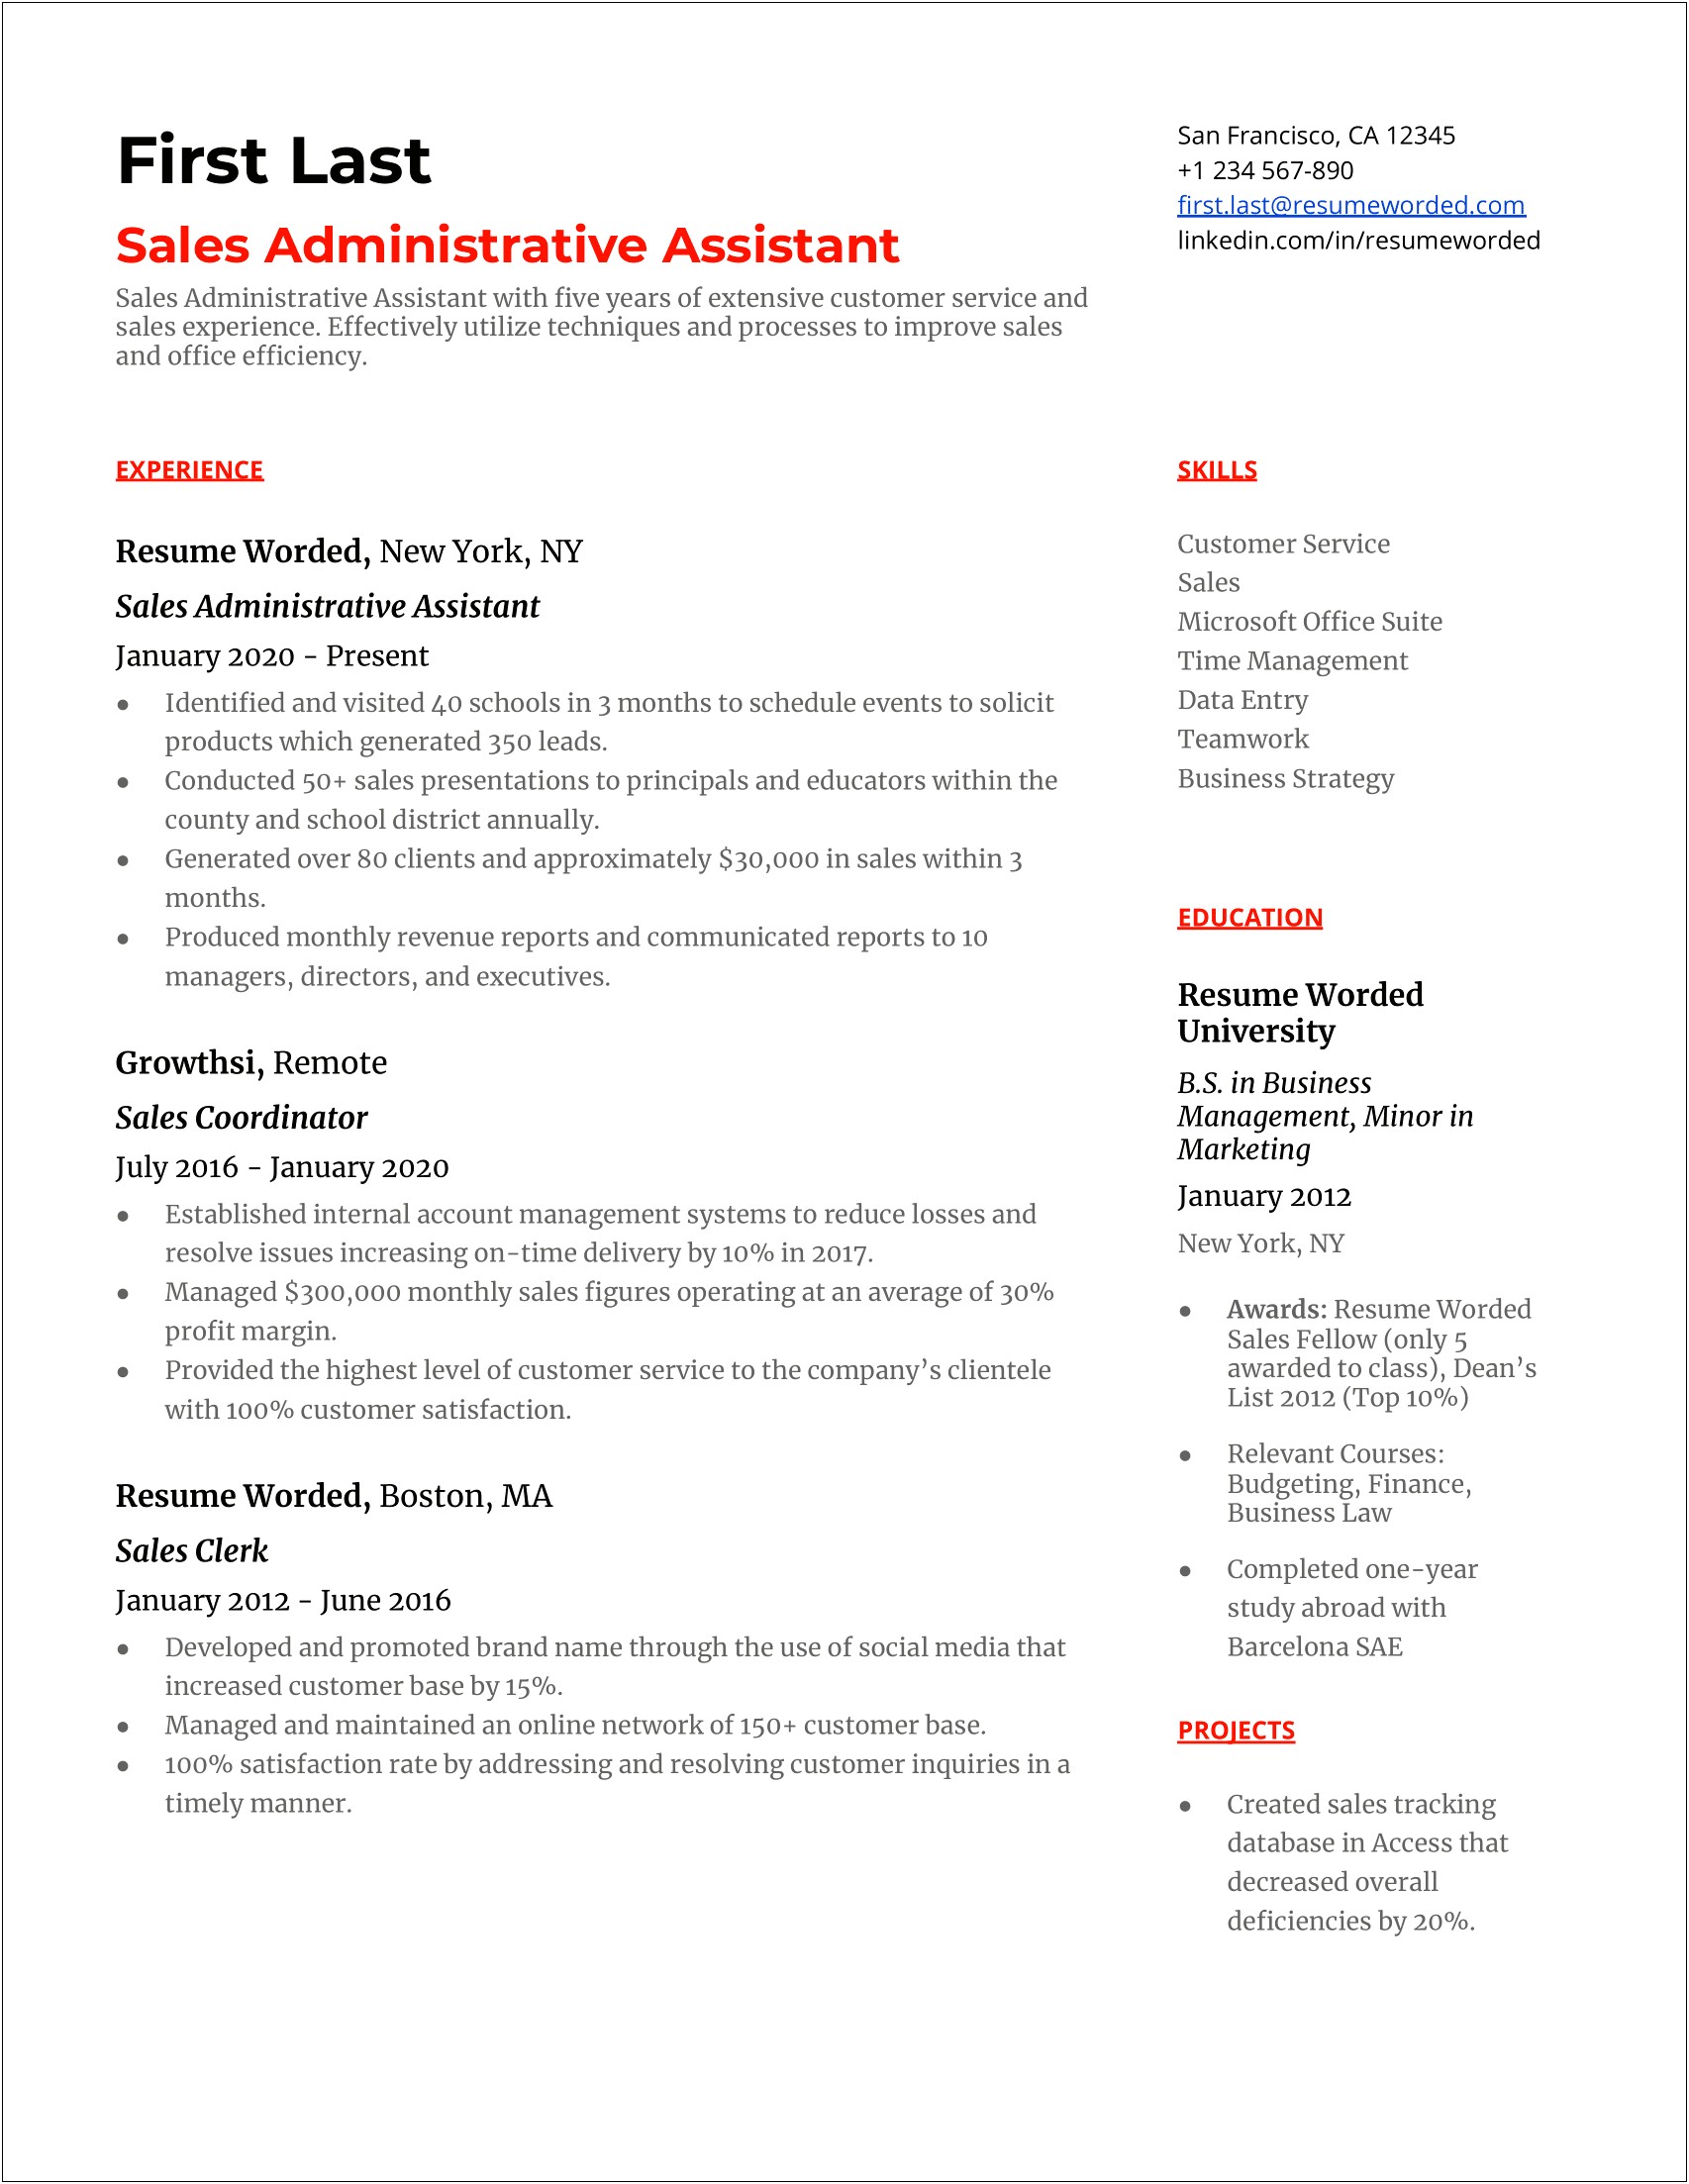 Finance Administrative Assistant Job Responsibilities For Resume